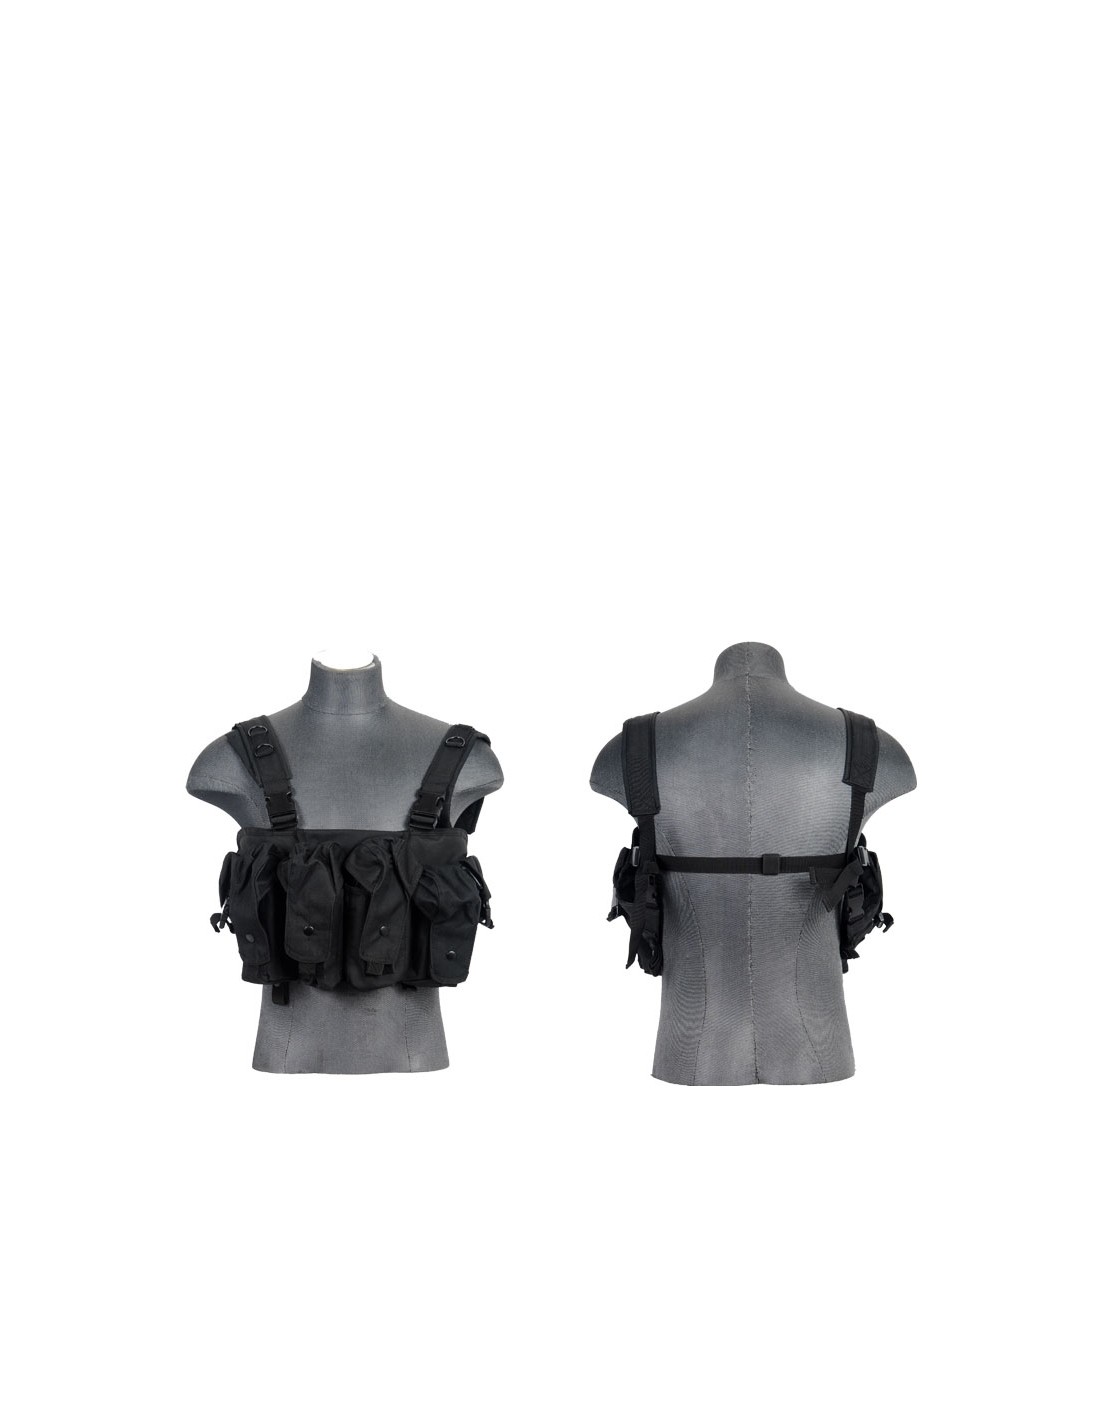 Lancer Tactical CA-308 AK Adjustable Chest Rig - Nylon, Holds 8 Mags